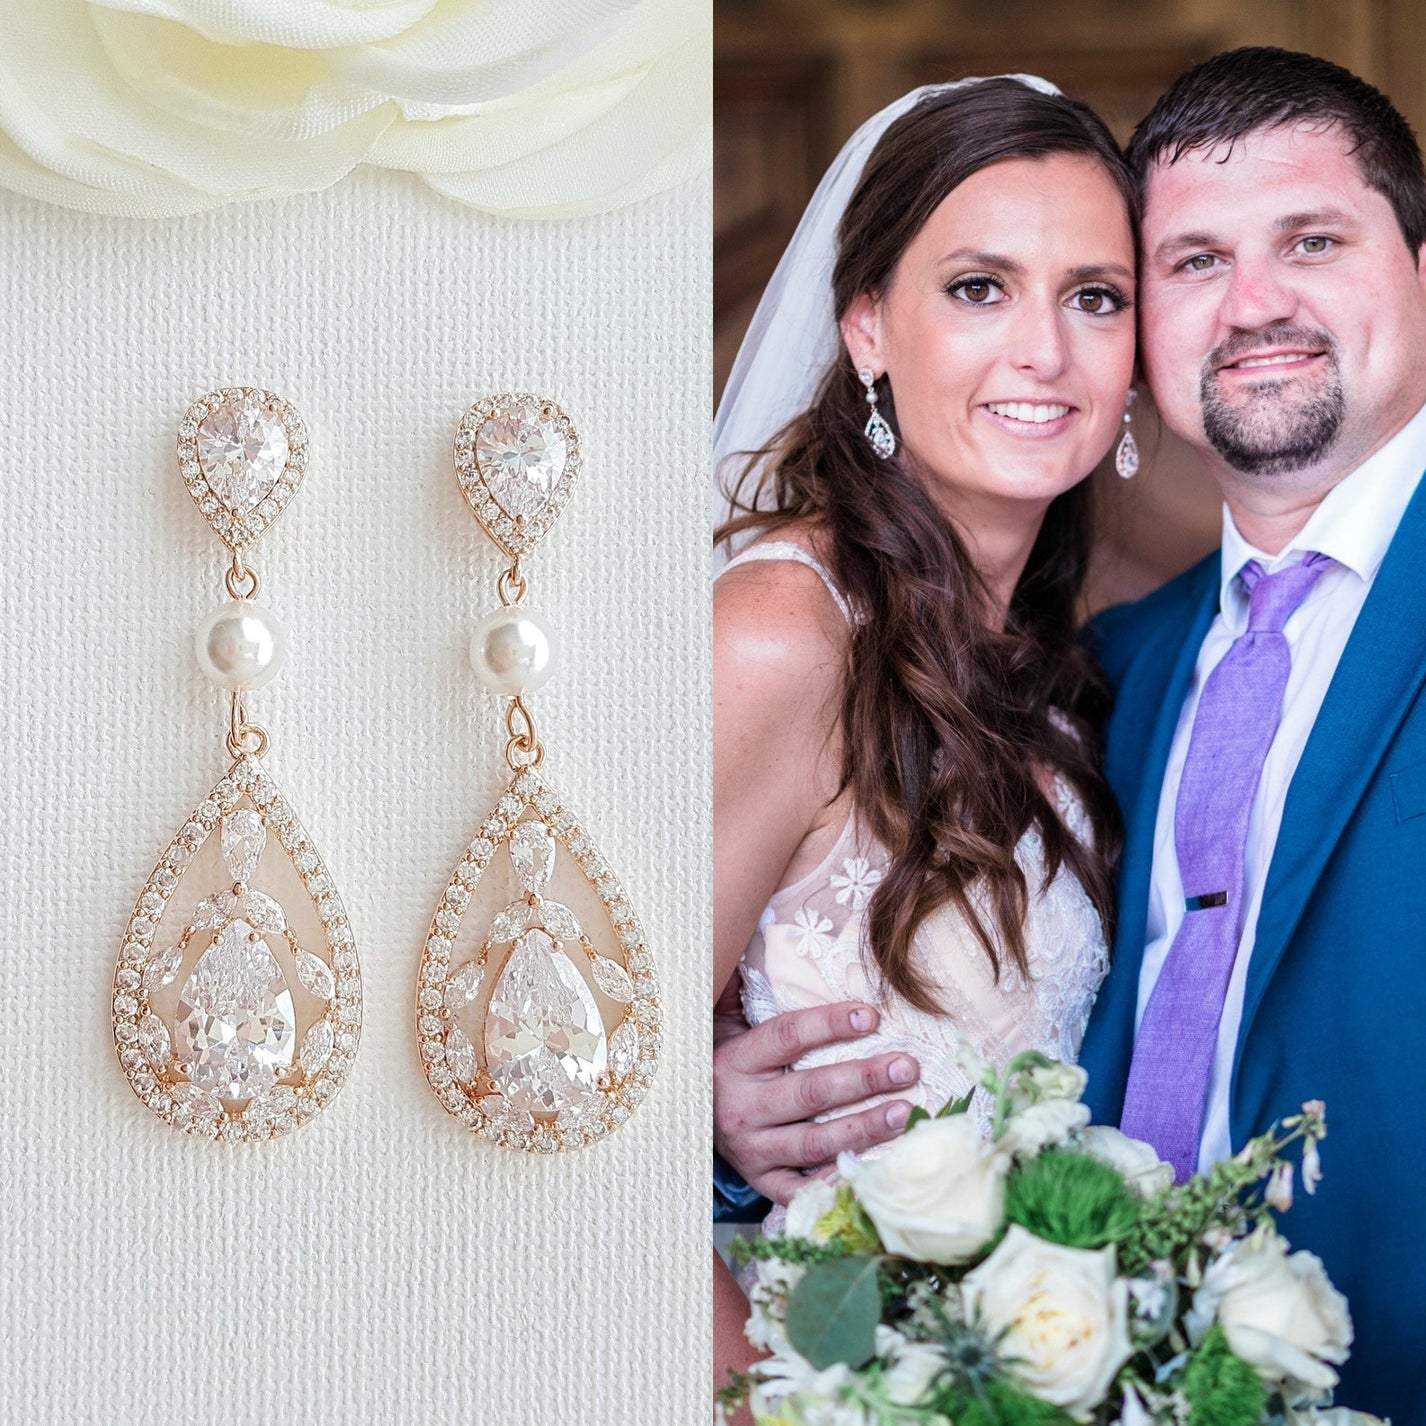 Rose Gold CZ Crystal Earrings for Weddings & Brides-Esther